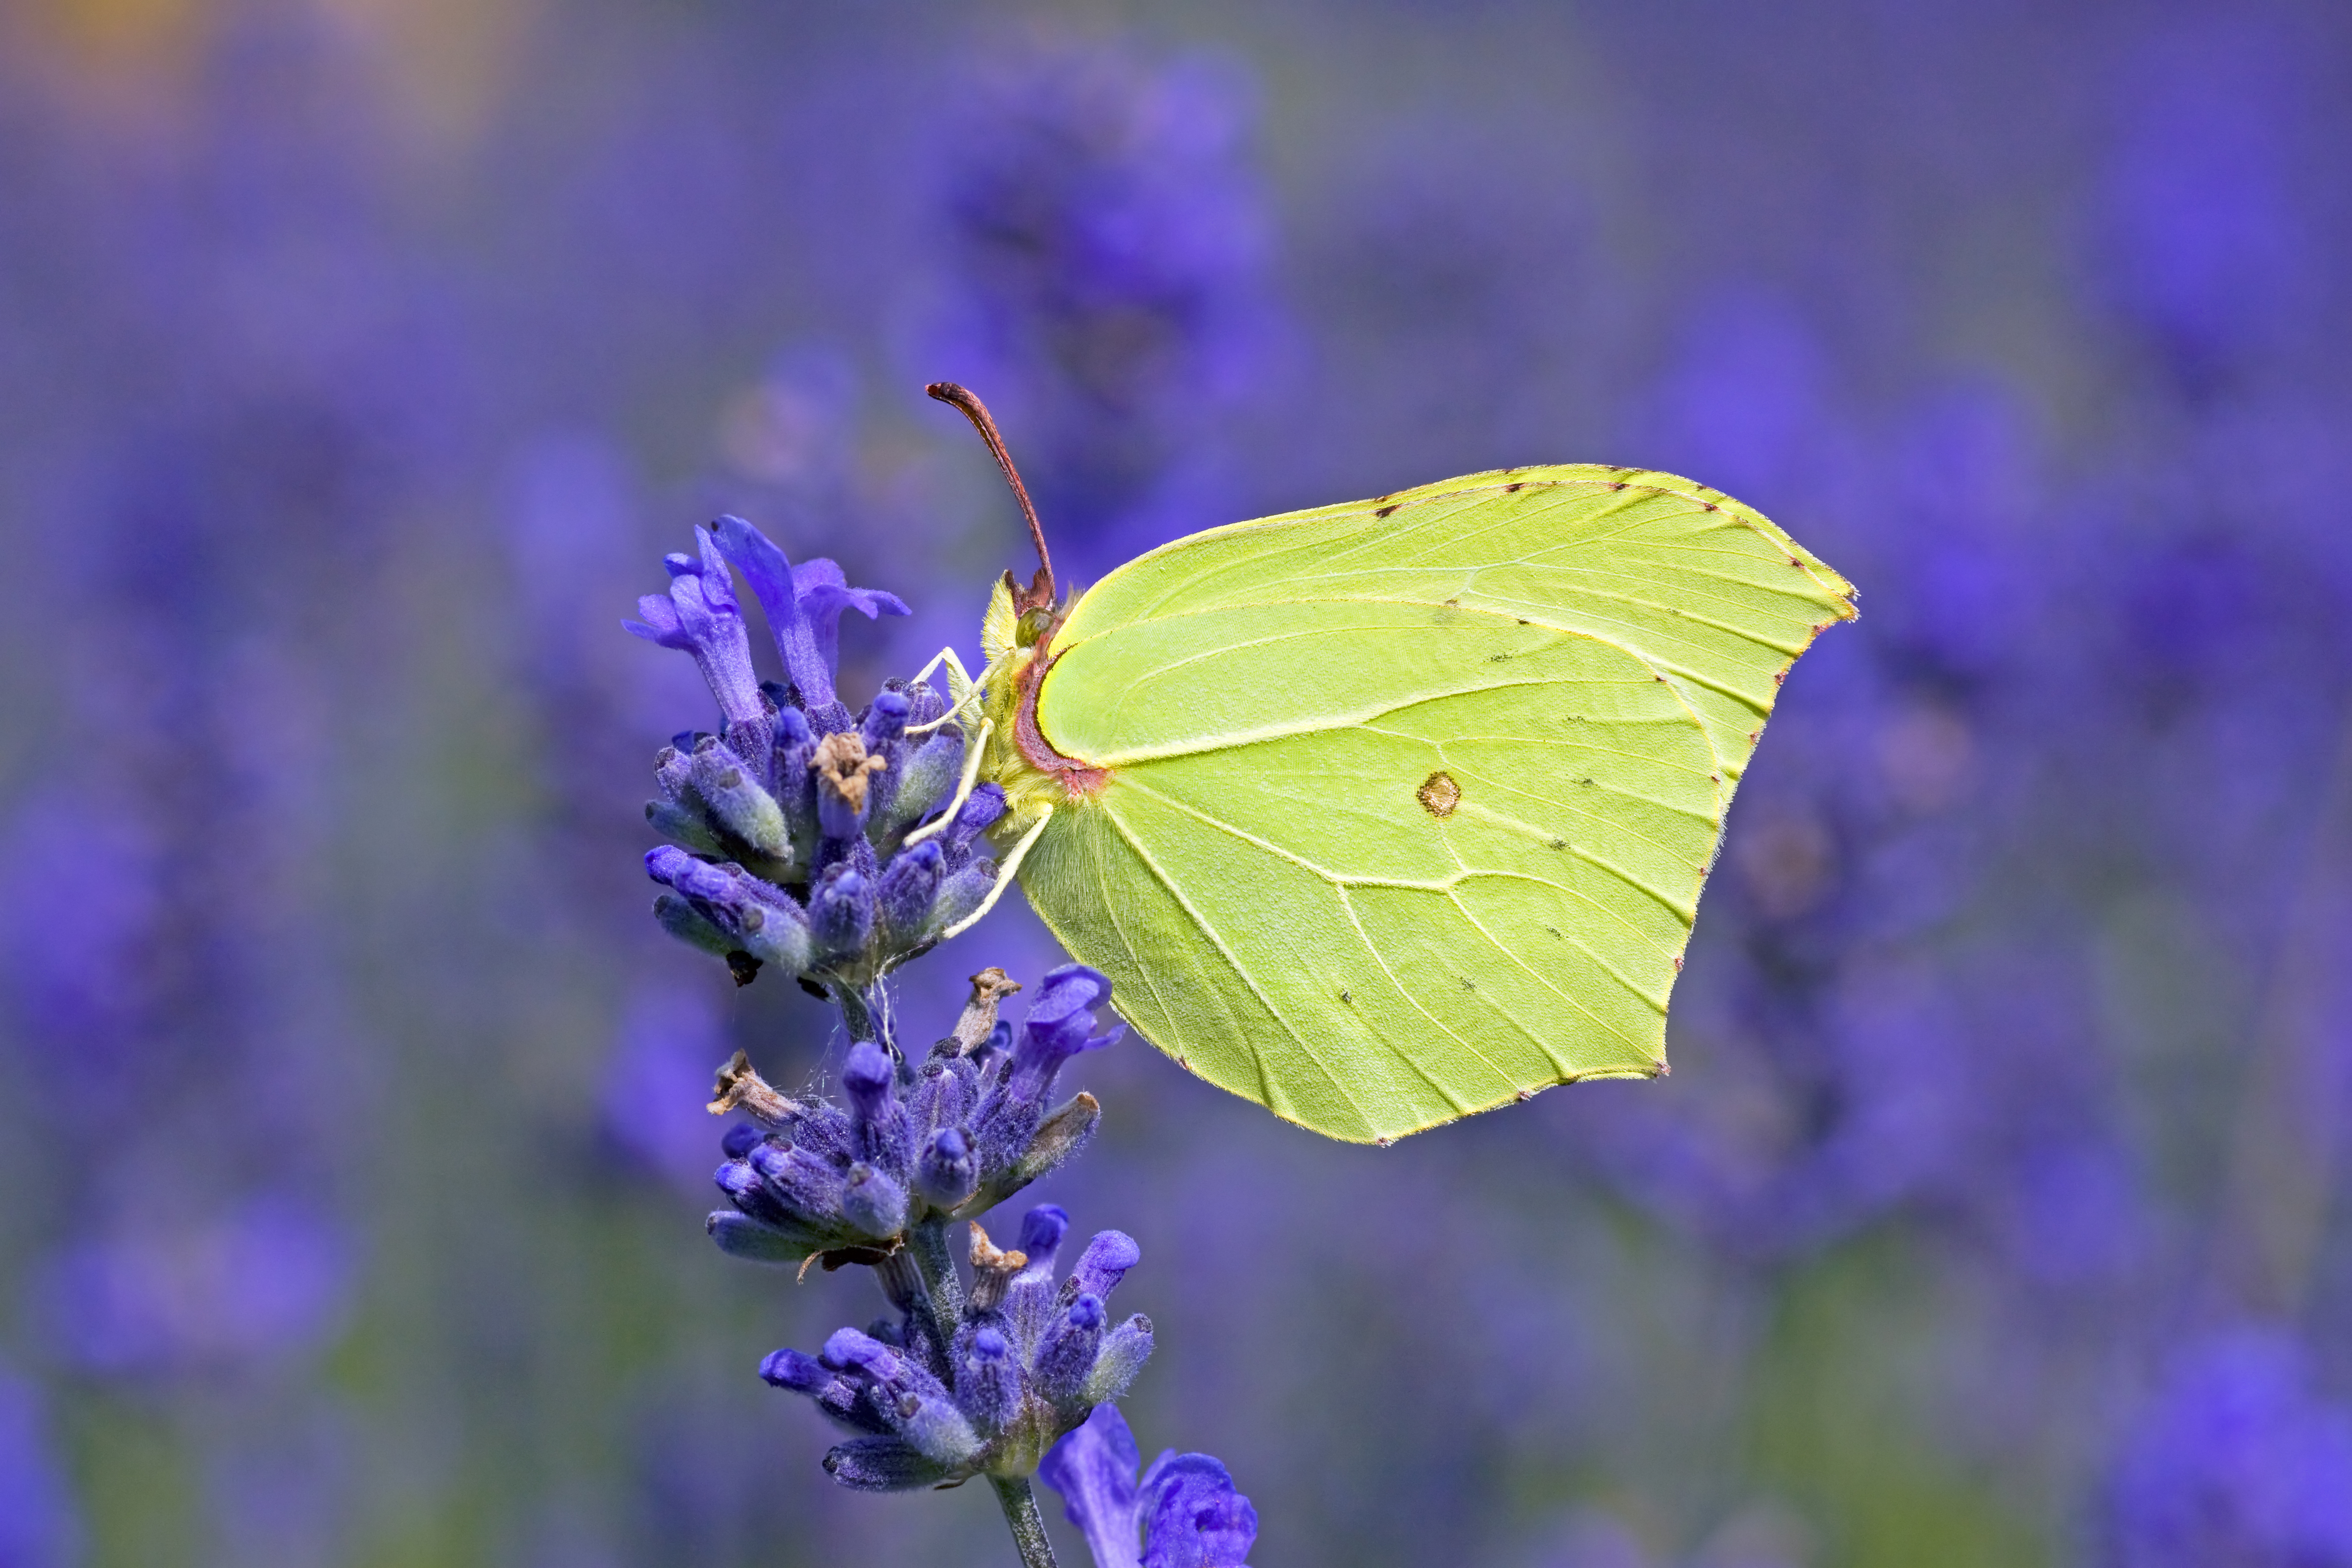 Species that flourished last year include the Brimstone butterfly (Matt Berry/PA)